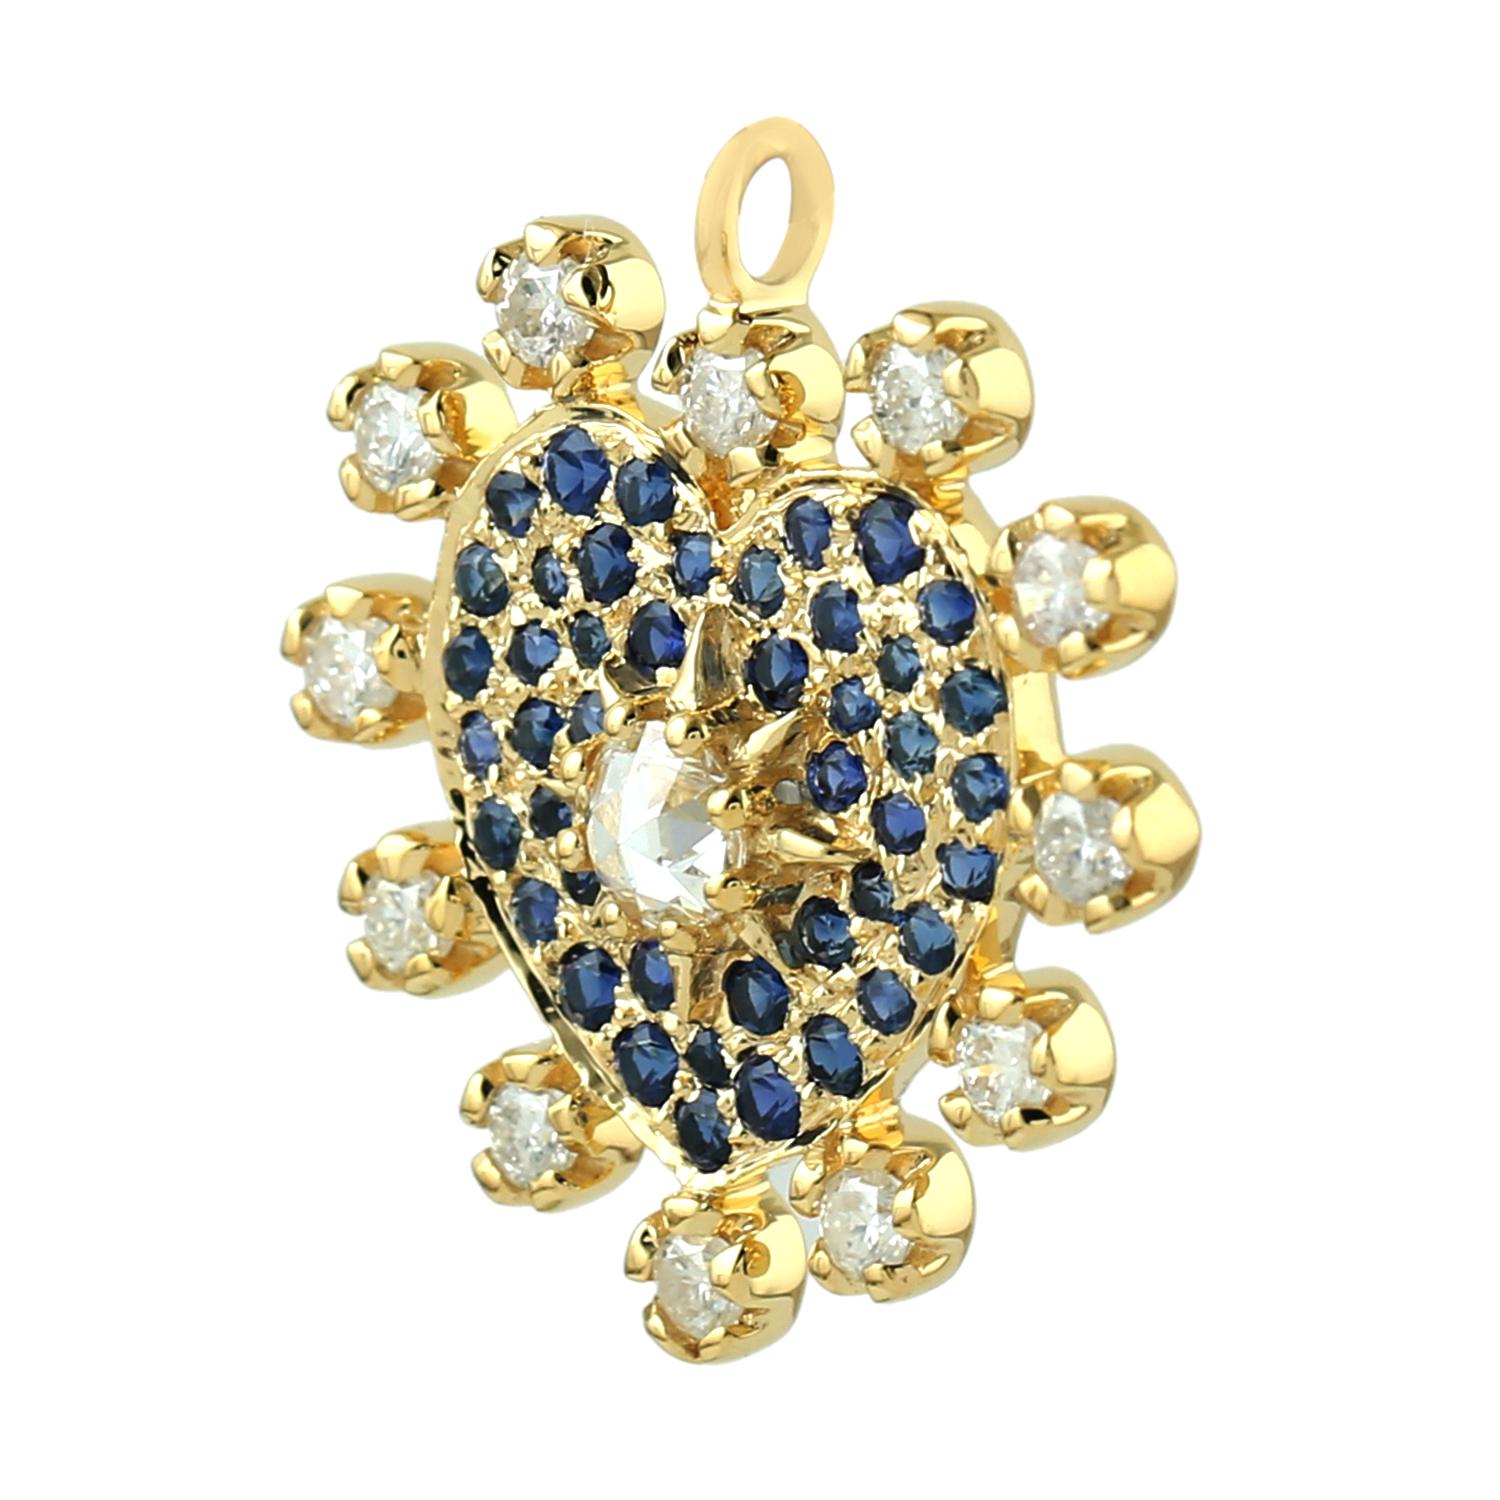 The 18 karat gold pendant is set with .63 carats blue sapphire and .57 carats of shimmering diamonds.  See other charm collection. Also available in emerald and ruby.

FOLLOW  MEGHNA JEWELS storefront to view the latest collection & exclusive